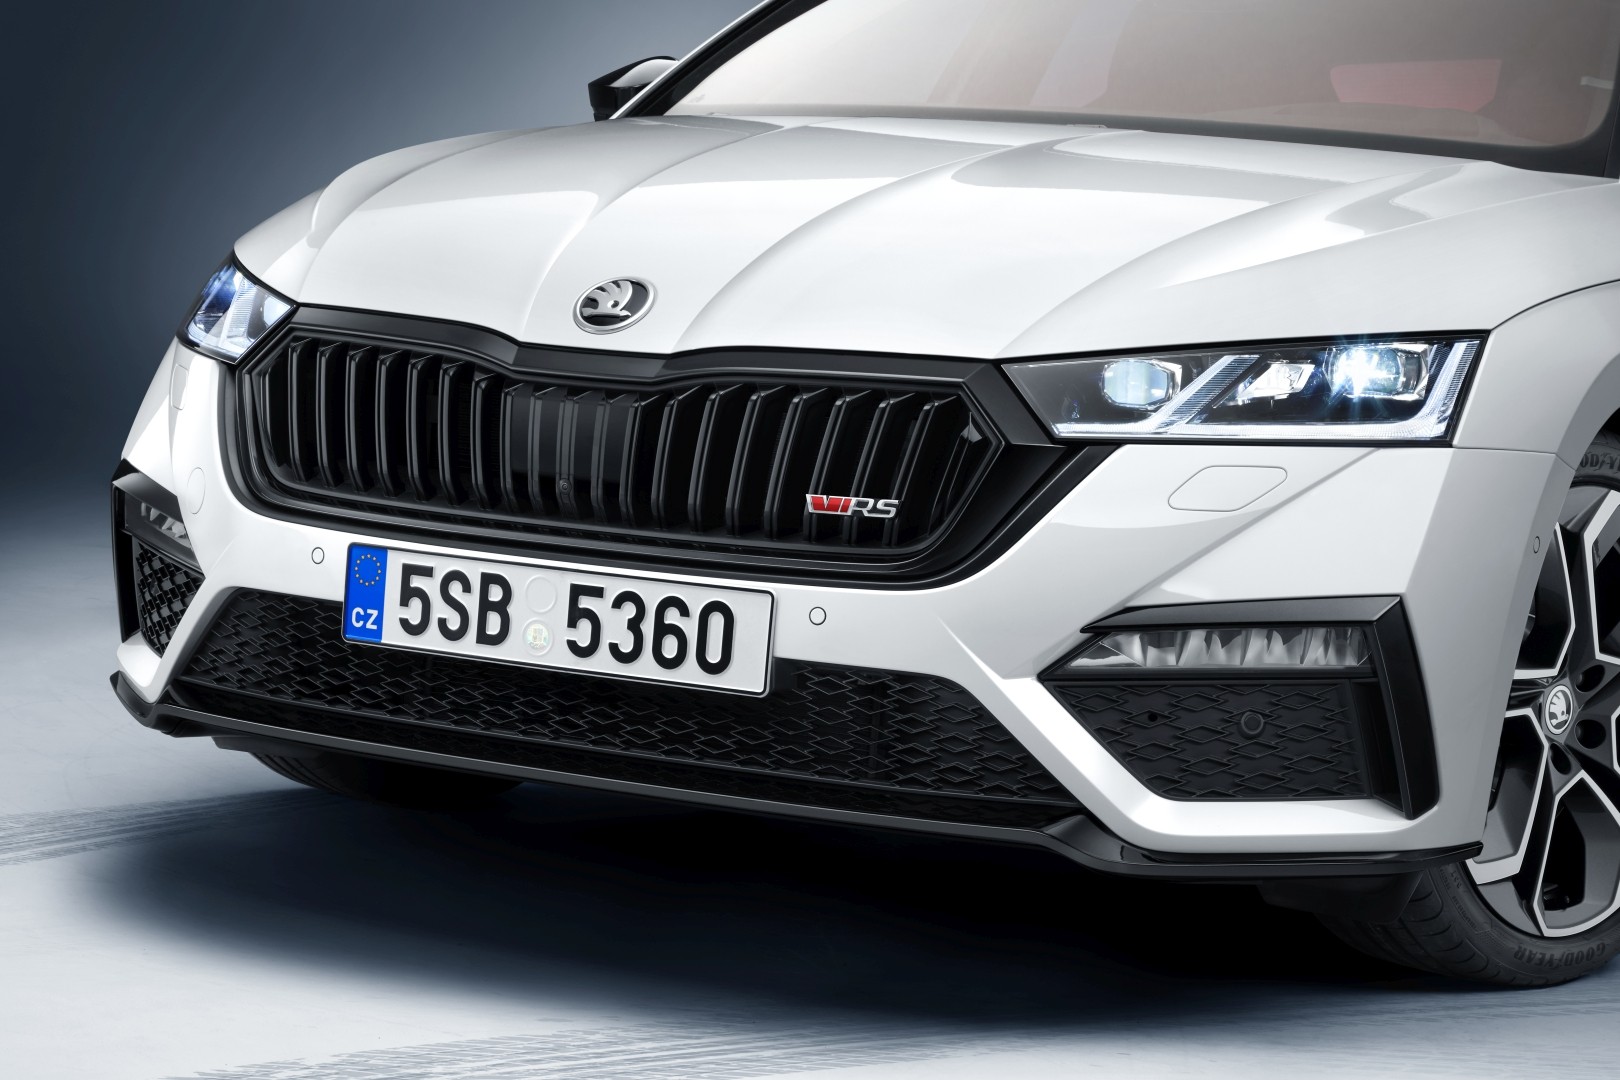 New Skoda Octavia RS iV 1.4 TSI review: performance, features